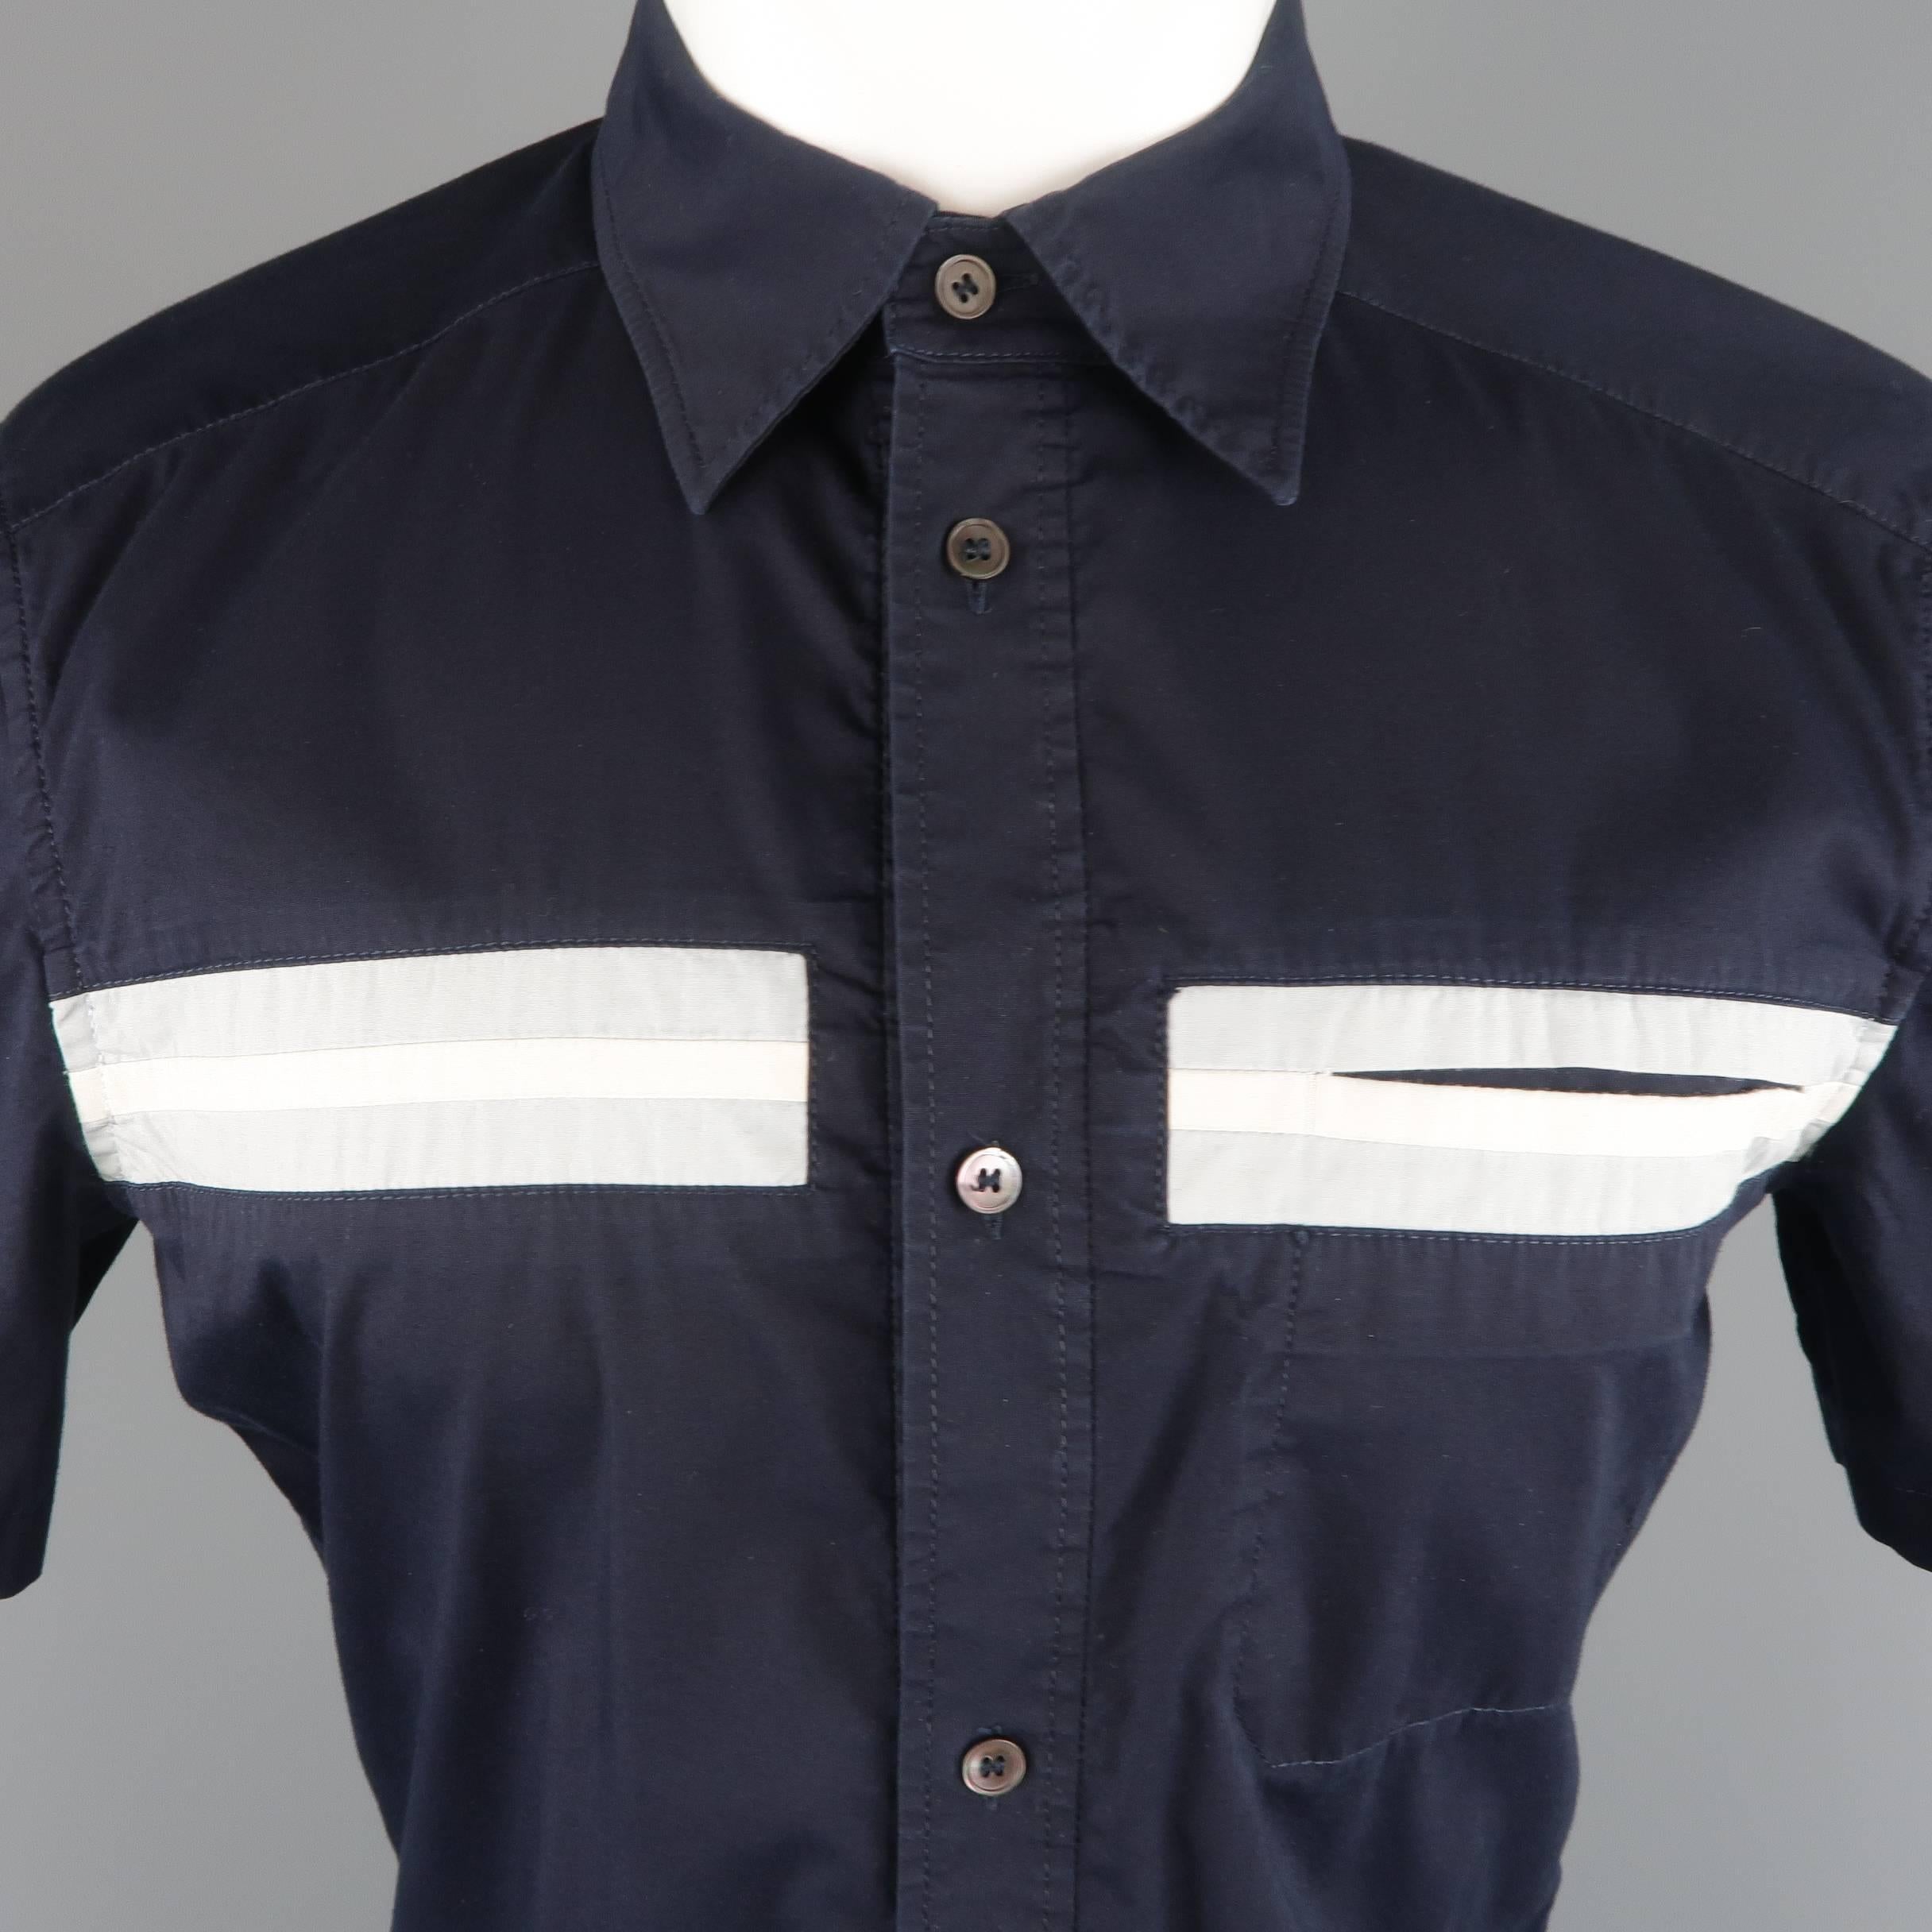 PRADA short sleeve shirt comes in navy stretch cotton with a pointed collar, light blue and white stripe, pocket, and red rubber logo tab. Made in Italy.
 
Good Pre-Owned Condition.
Marked: M
 
Measurements:
 
Shoulder: 16 in.
Chest: 41 in.
Sleeve: